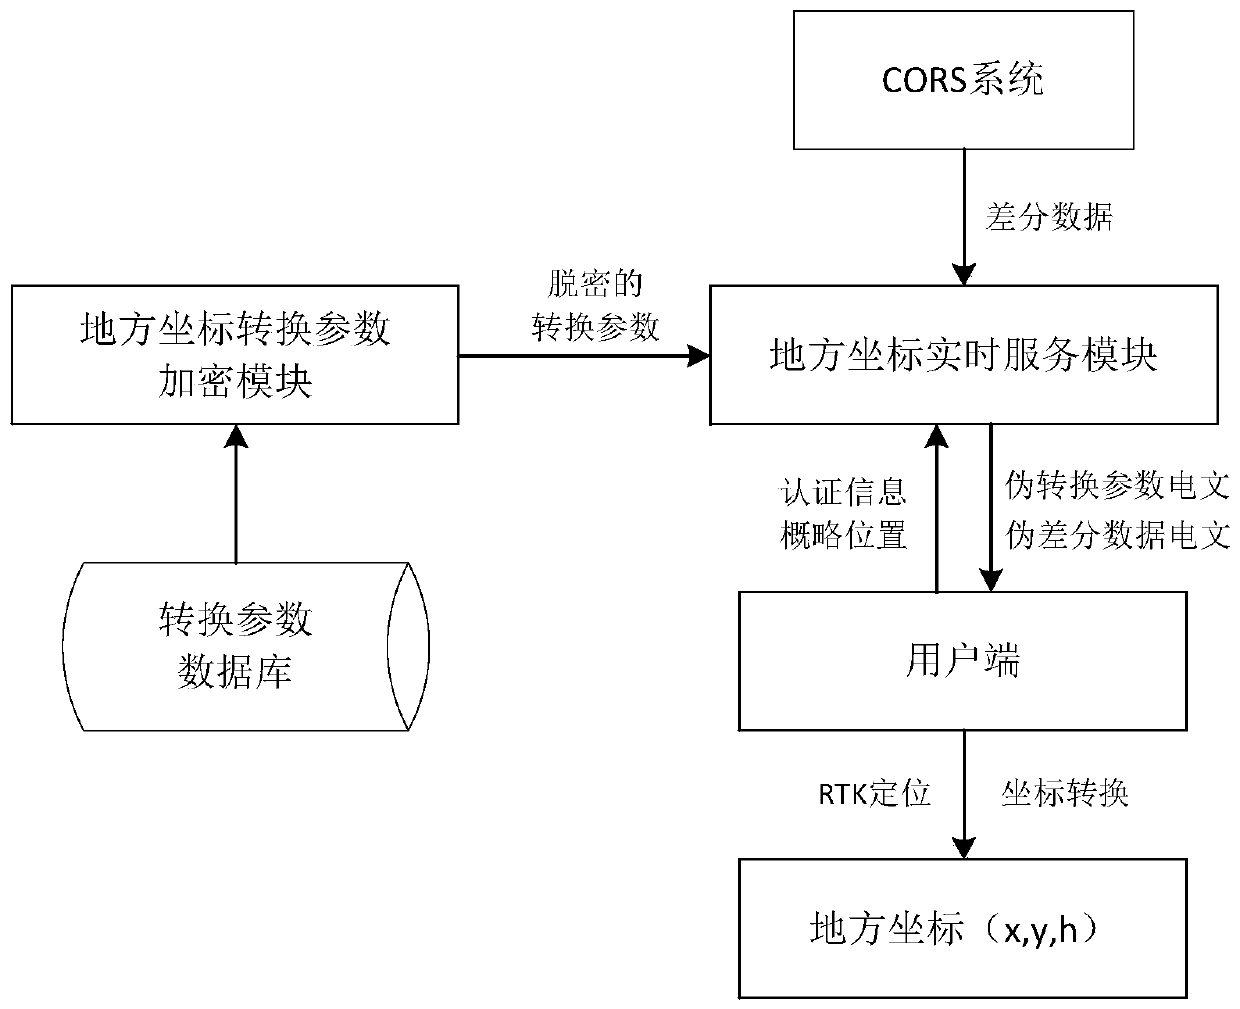 CORS (Continuously Operating Reference Stations) system-based real-time positioning service method for local coordinates